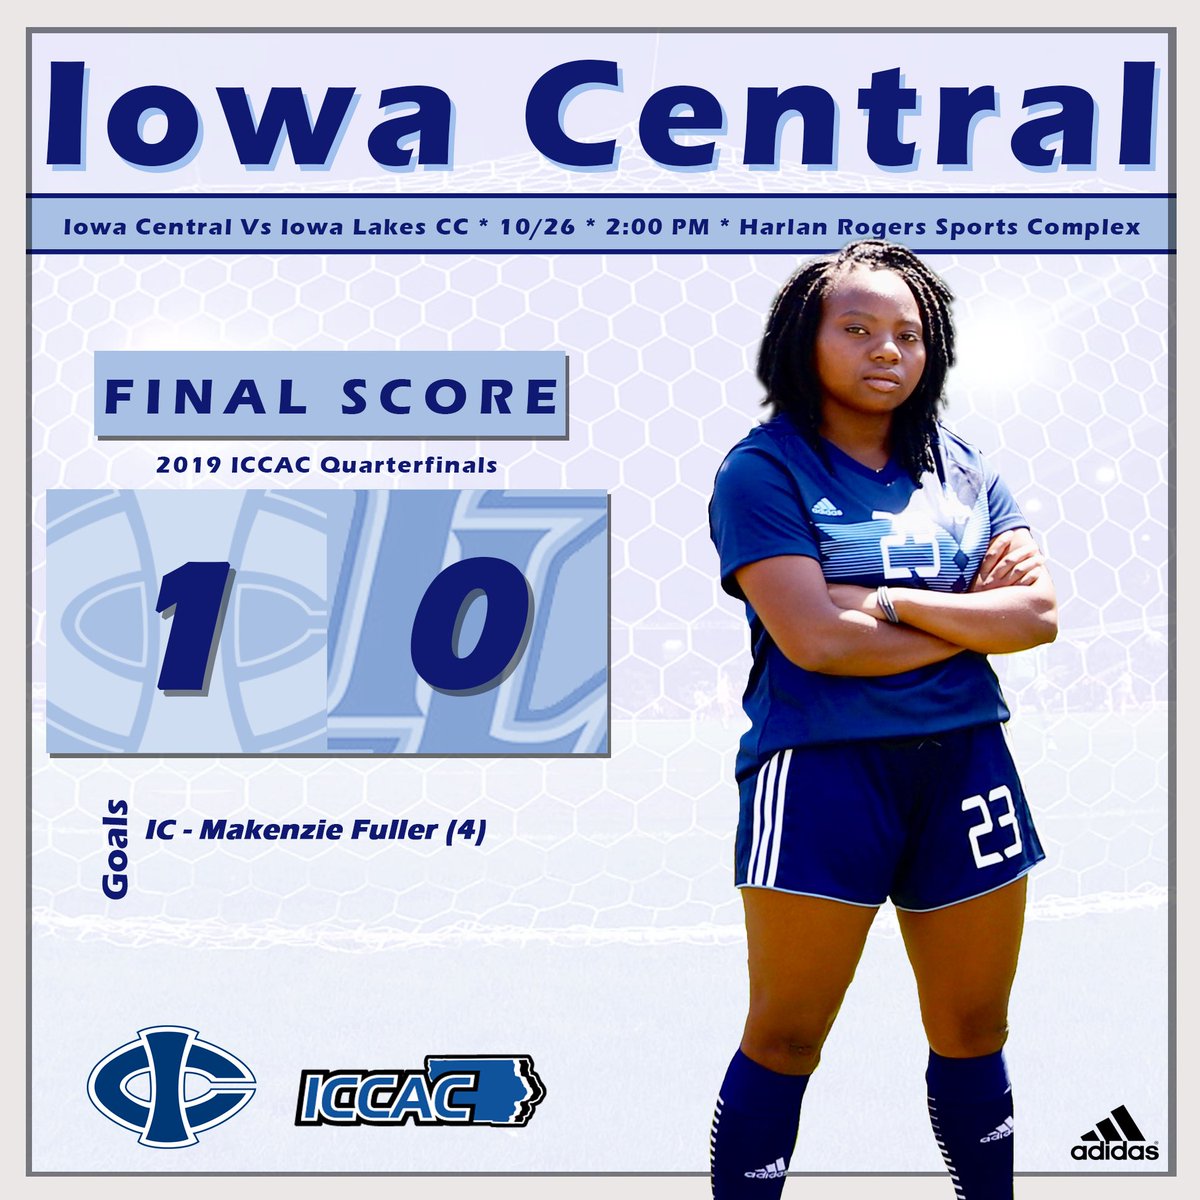 Iowa Central WINS! Makenzie Fuller’s goal late in the 1st half was the Tritons ticket to the  to the Semifinals of the ICCAC Region XI tournament. The Tritons will be facing Indian Hills on Tuesday at 2 PM #TritonNation #TheTritonWay #InspireGreatness